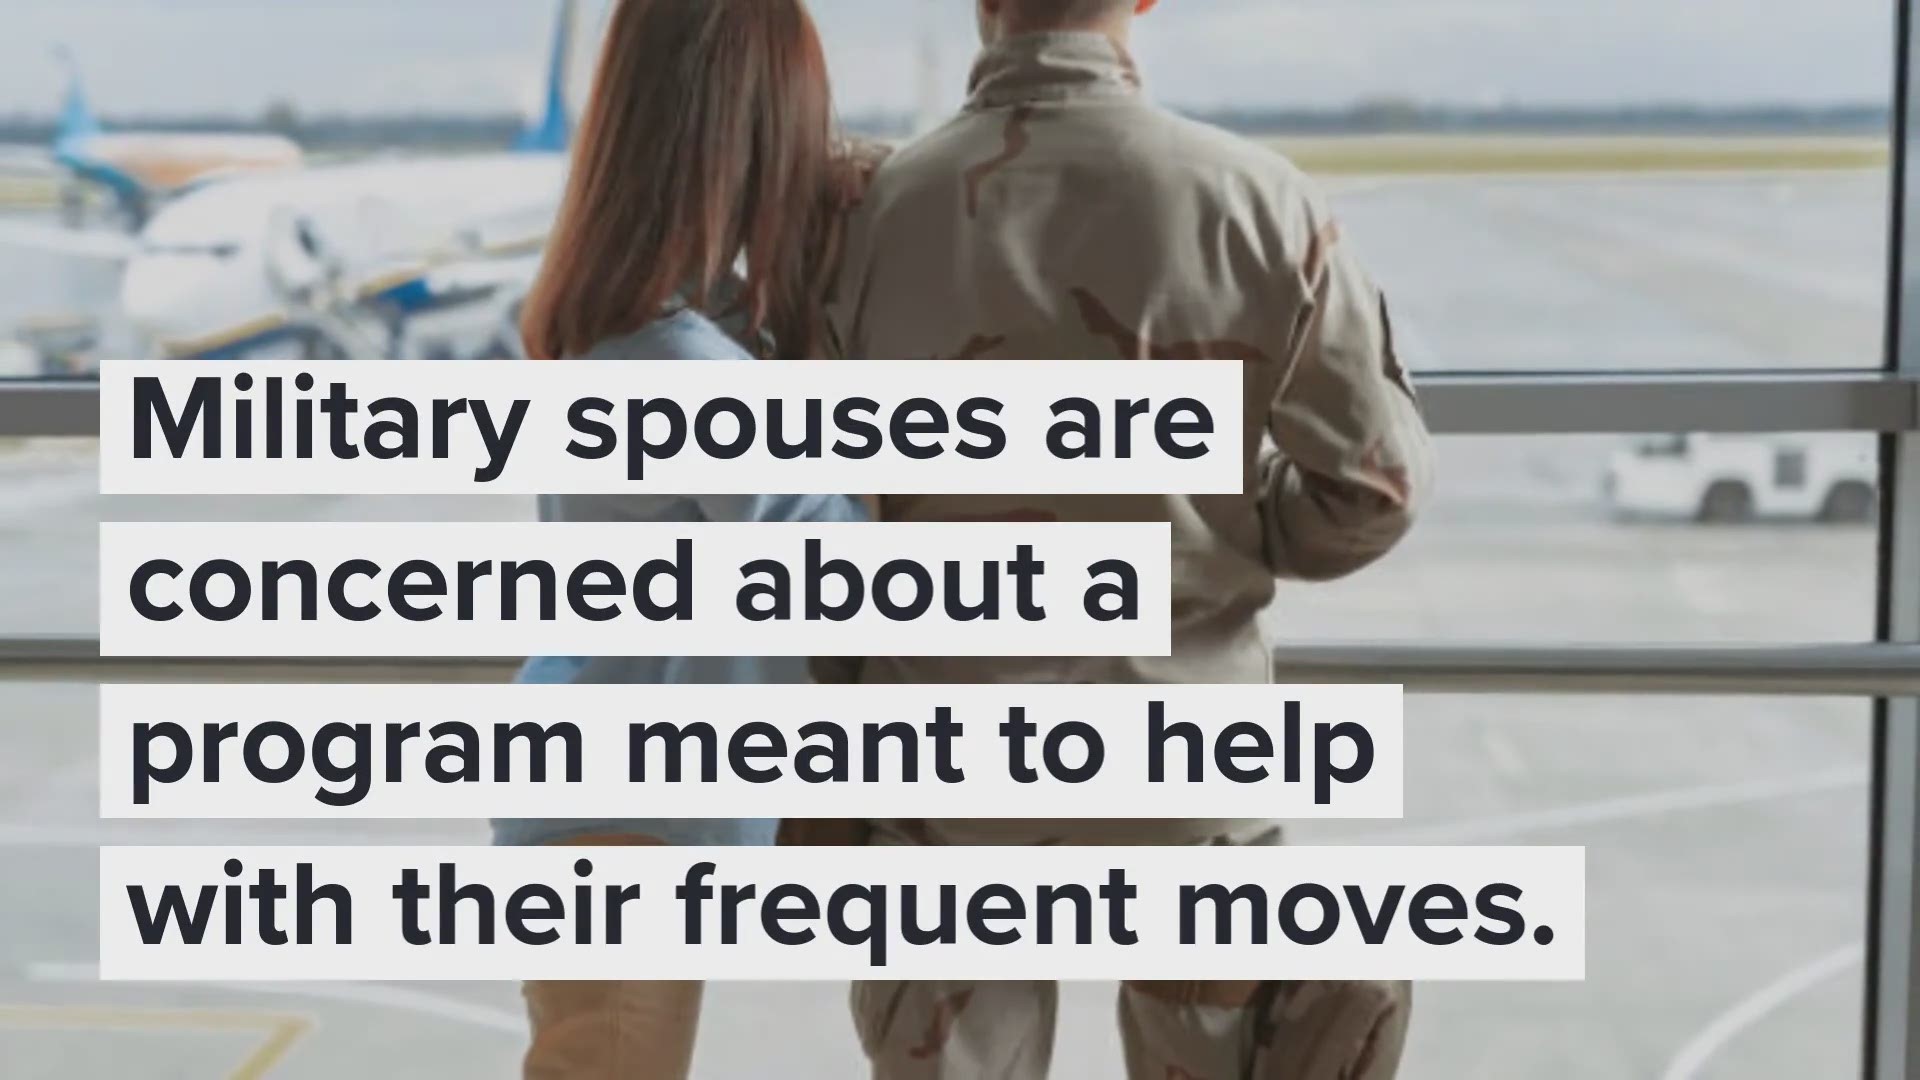 Each branch announced instructions for how spouses could get back money they spend to get re-licensed in their new states. Some told us officials don't know about it